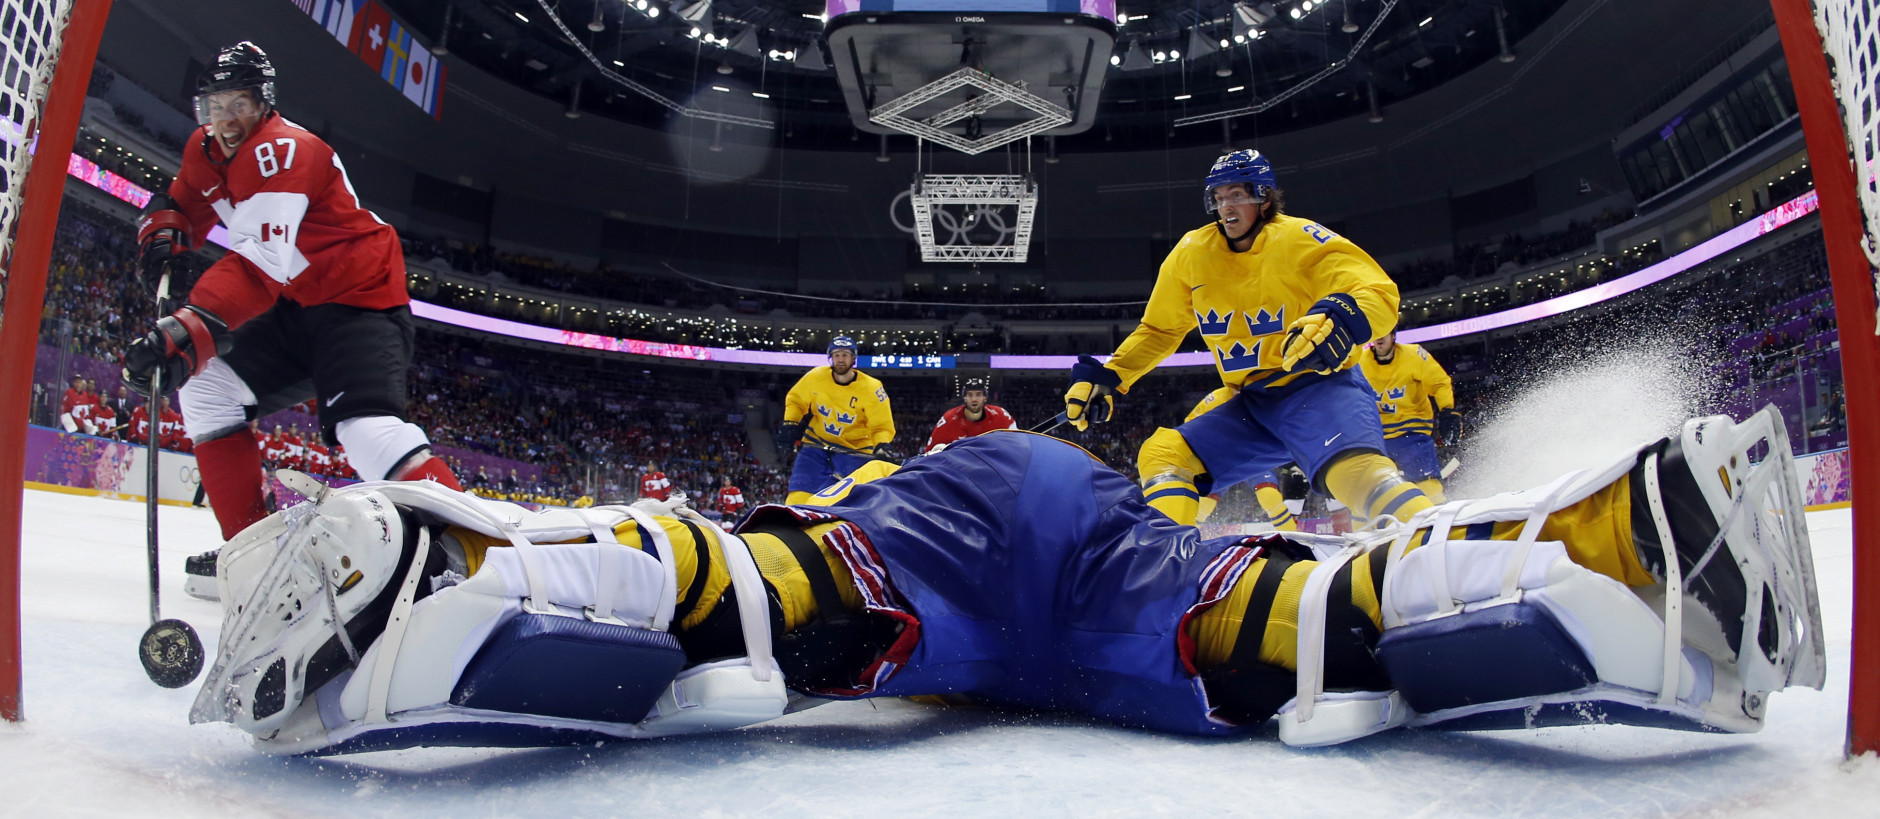 FOR USE AS DESIRED, YEAR END PHOTOS - FILE - Canada forward Sidney Crosby scores a goal on Sweden goaltender Henrik Lundqvist during the second period of the men's gold medal ice hockey game at the 2014 Winter Olympics, Sunday, Feb. 23, 2014, in Sochi, Russia. (AP Photo/Julio Cortez, Pool, File)